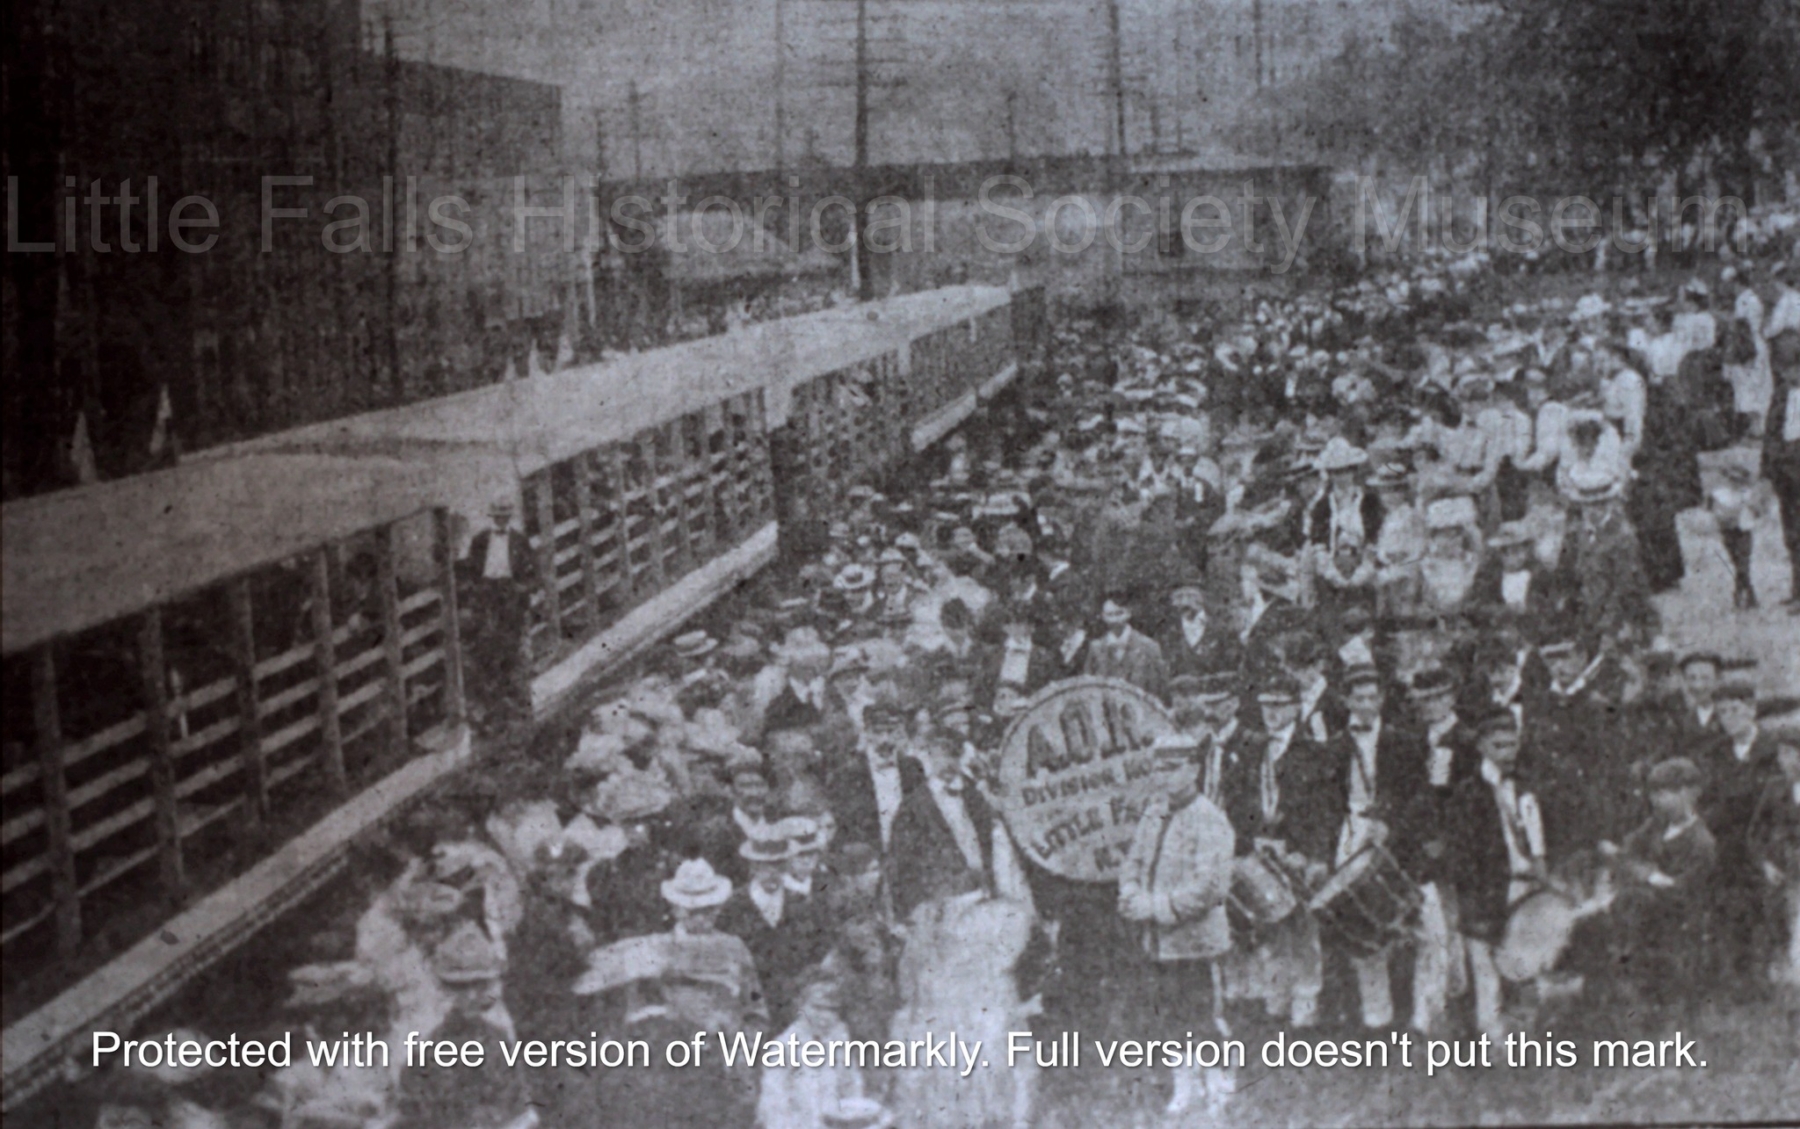 A Labor Day crowd waiting at the Little Falls Train Station to board a train on the Little Falls-Dolgeville line, on a excursion to High Falls Park | c.1890s